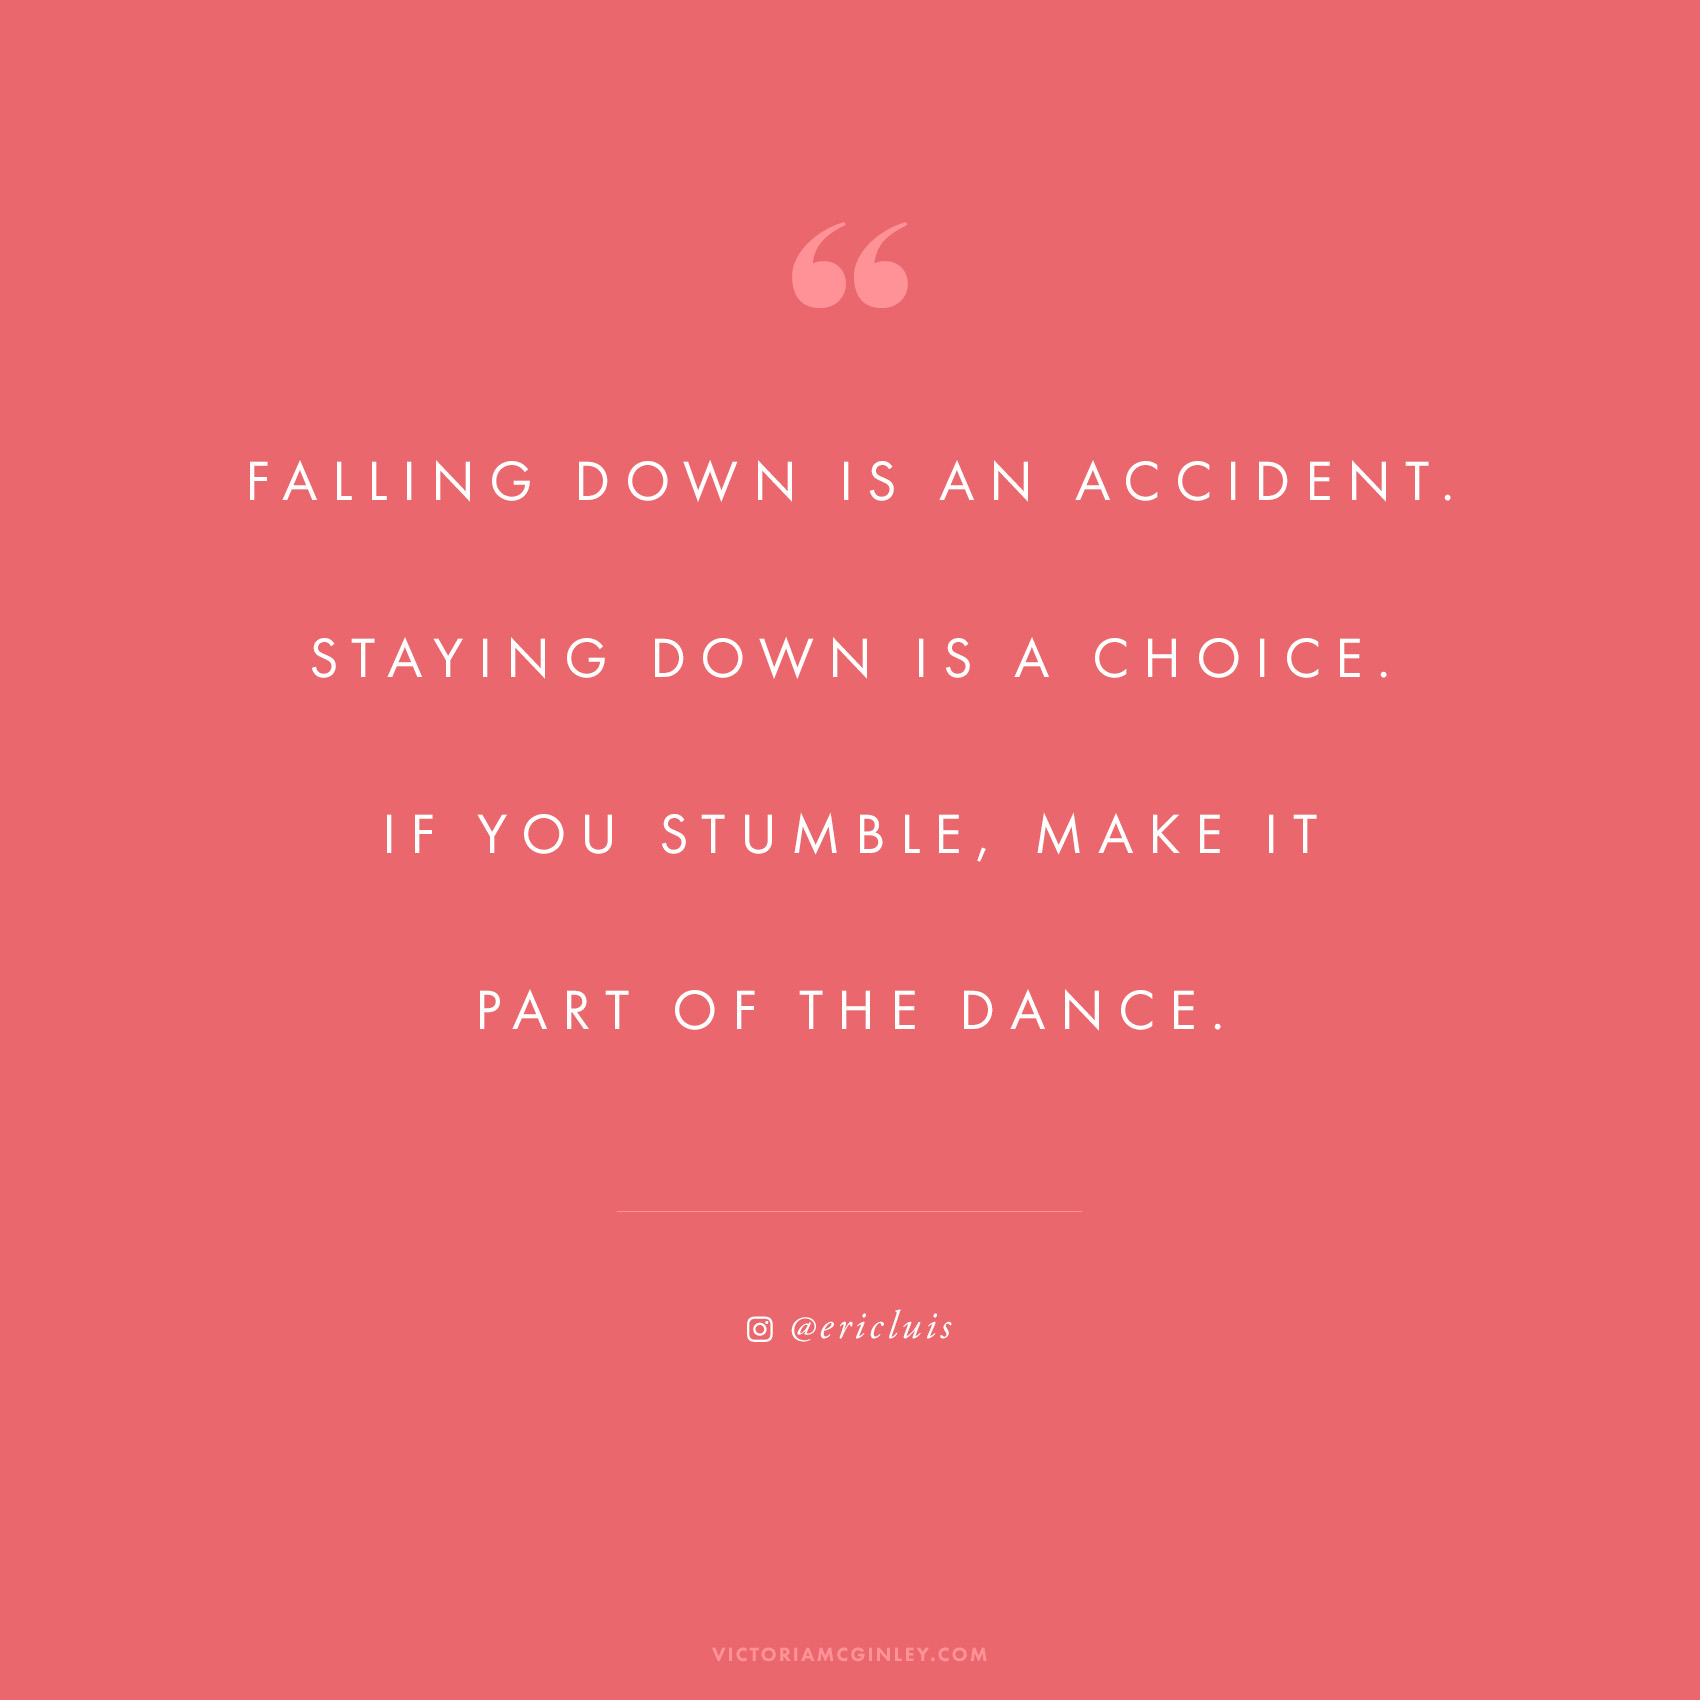 %22falling-down-is-an-accident-staying-down-is-a-choice-if-you-stumble-make-it-part-of-the-dance-%22-quote-from-eric-luis-via-victoriamstudio